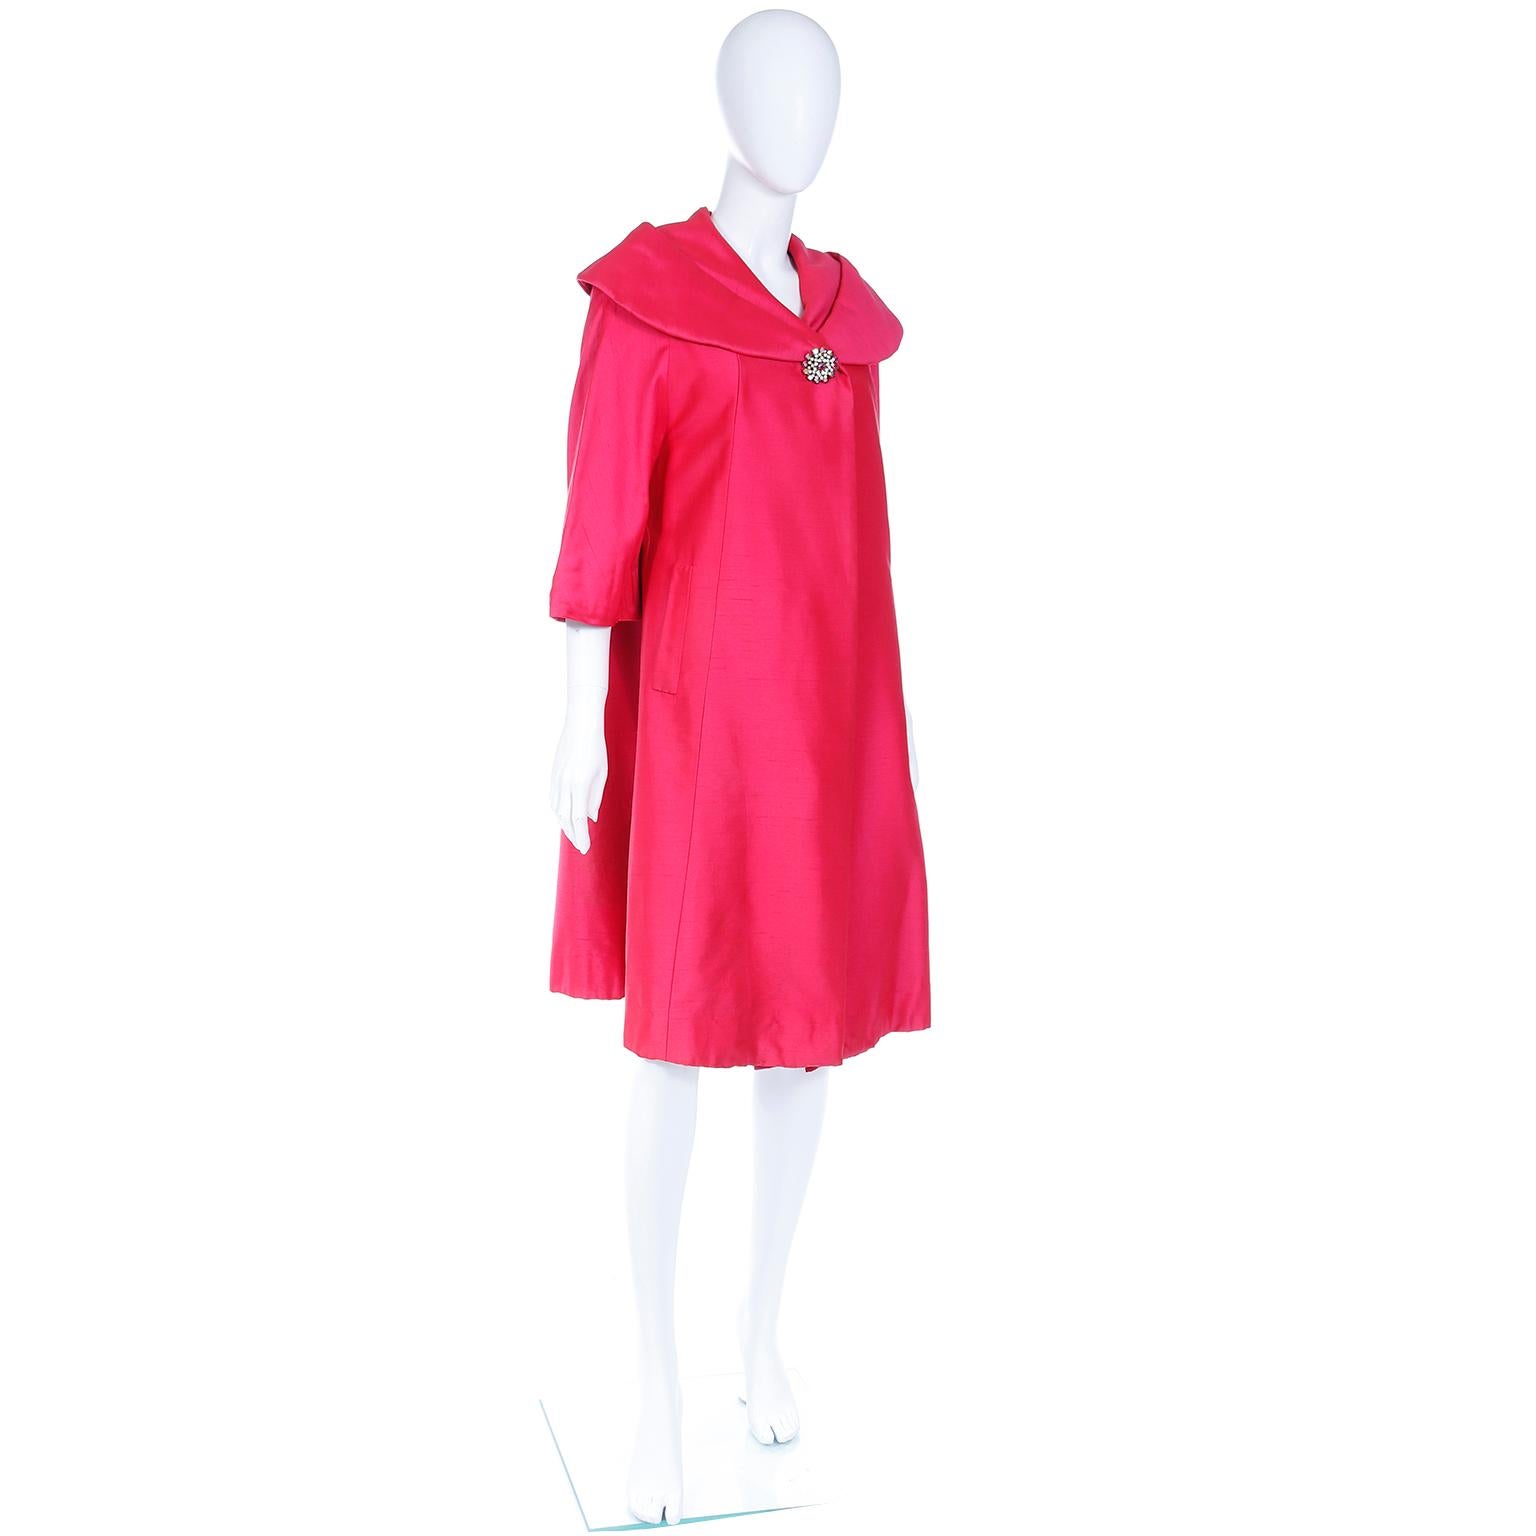 Bullocks Westwood Weyburn Room Vintage Bright Pink Silk Evening Coat In Excellent Condition For Sale In Portland, OR